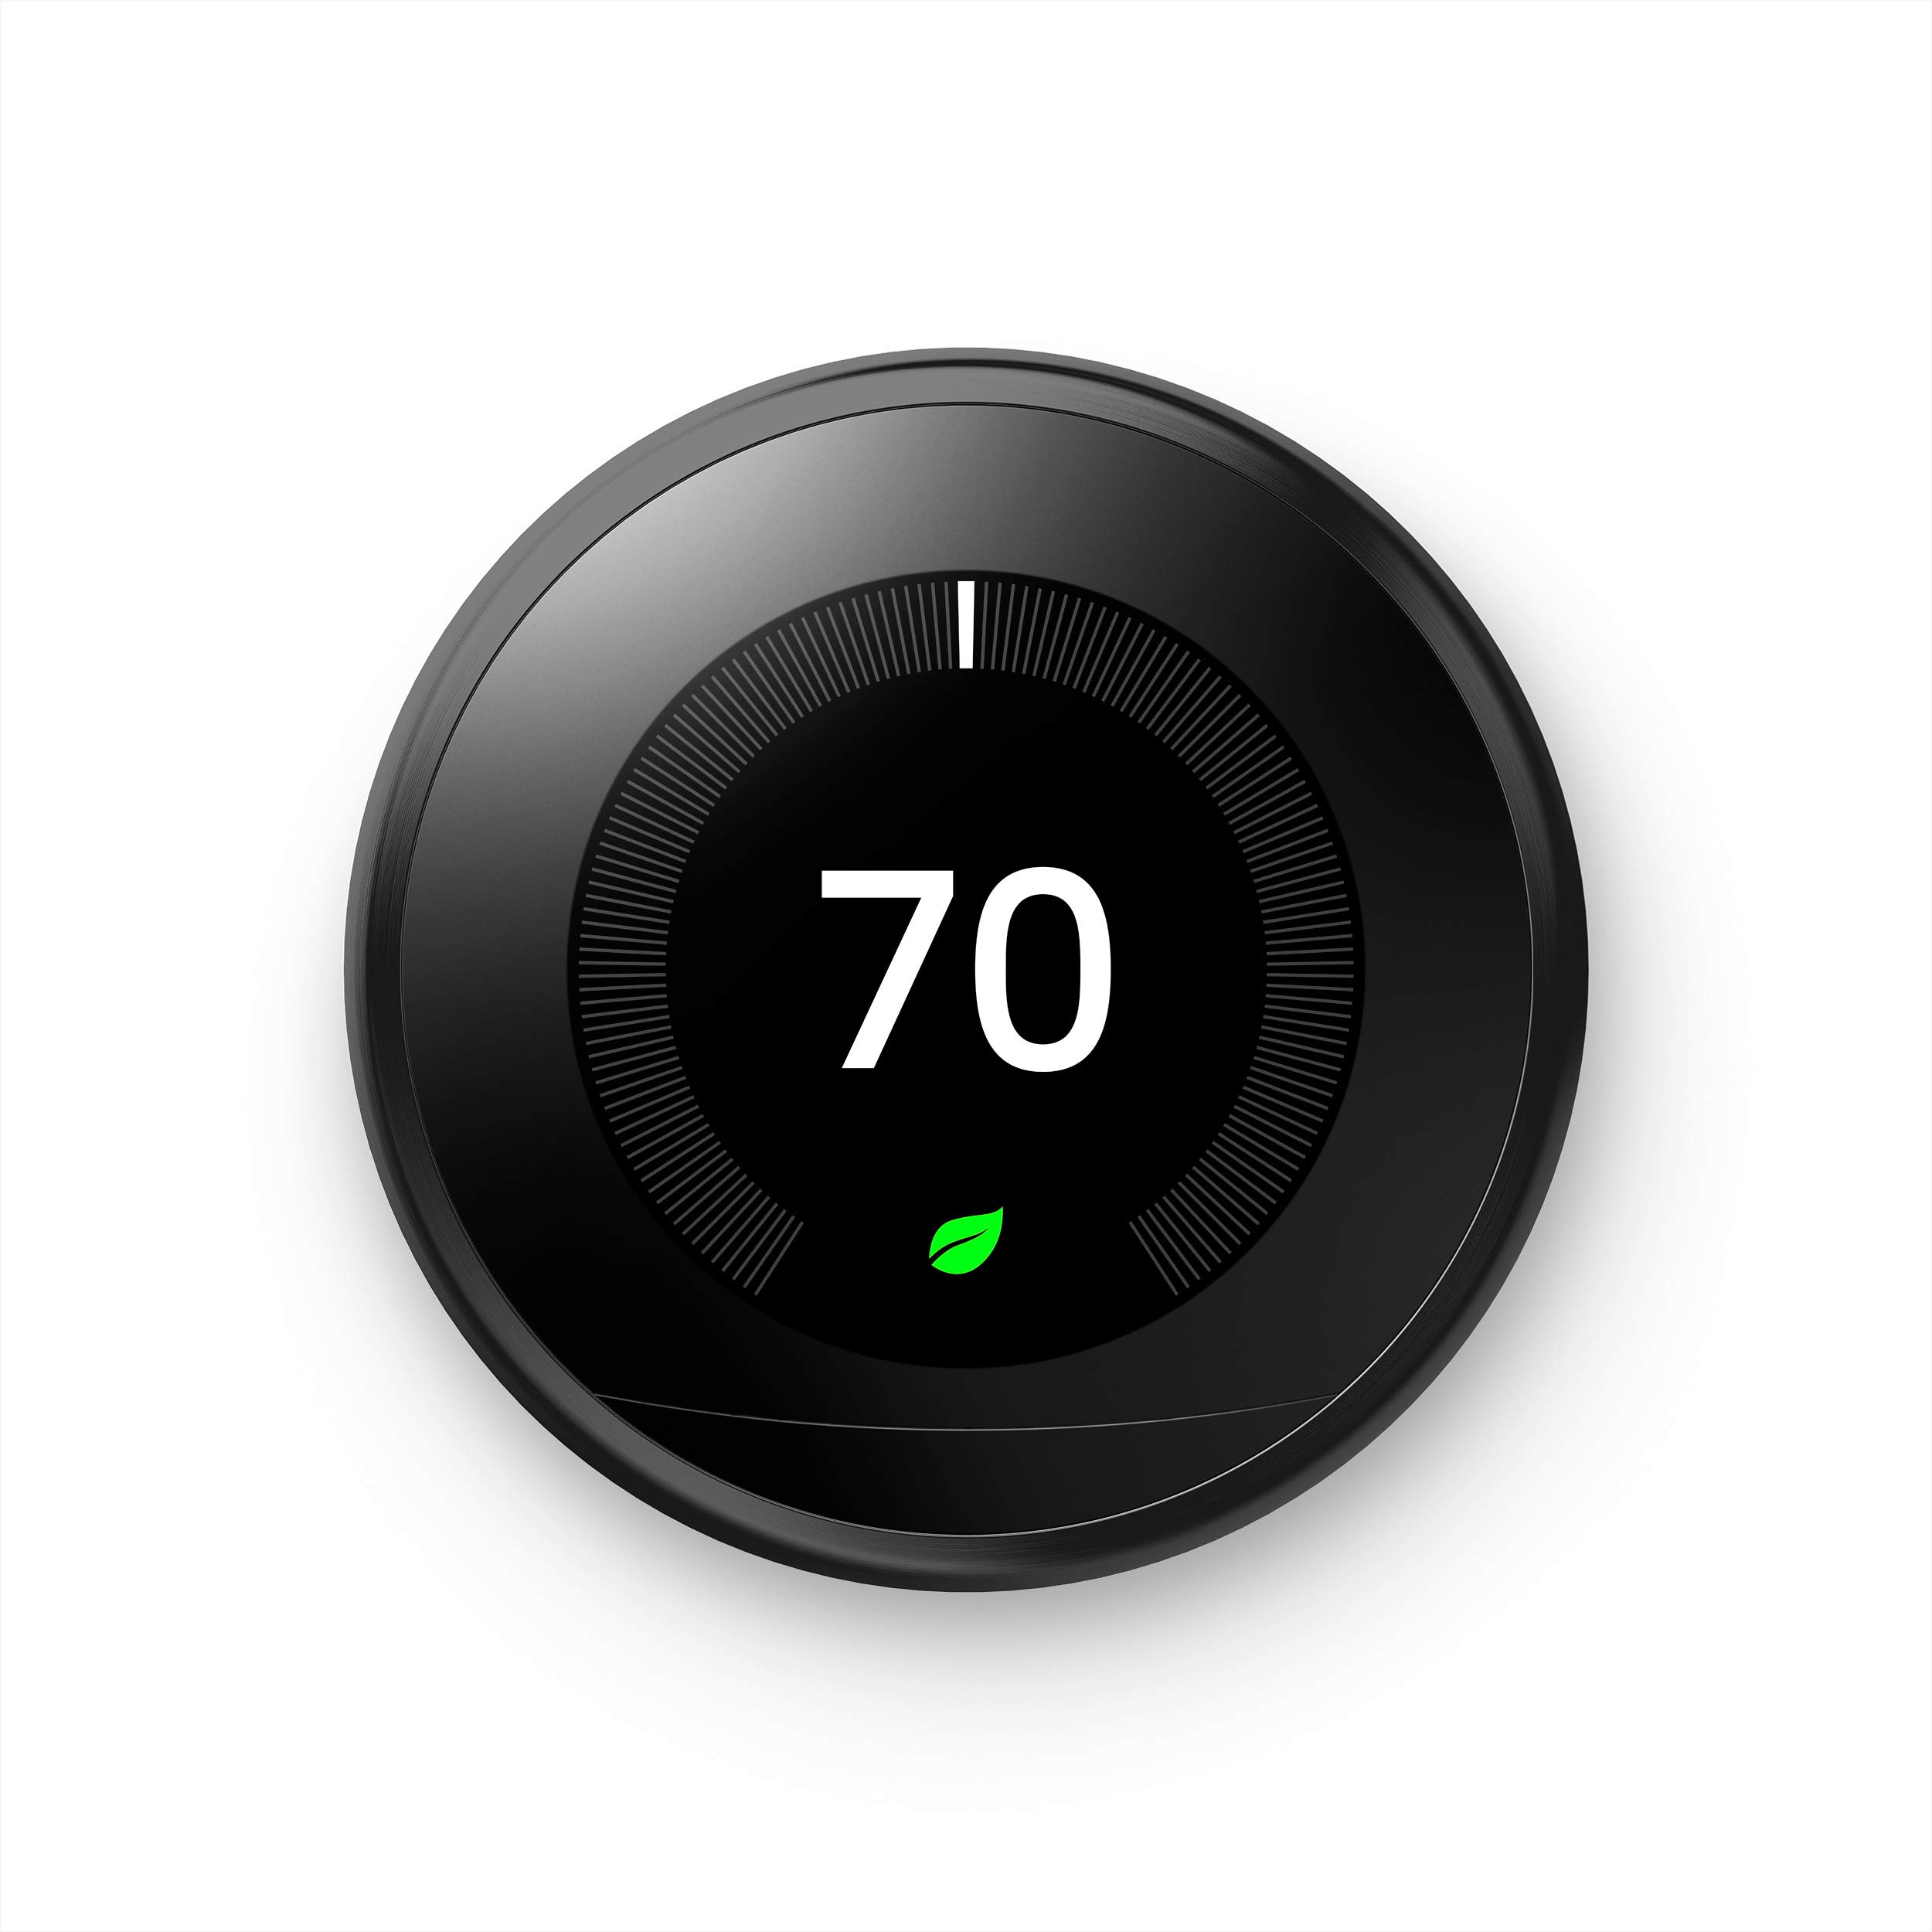 Google Nest Learning Thermostat - Programmable Smart Thermostat for Home - 3rd Generation Nest Thermostat - Compatible with Alexa